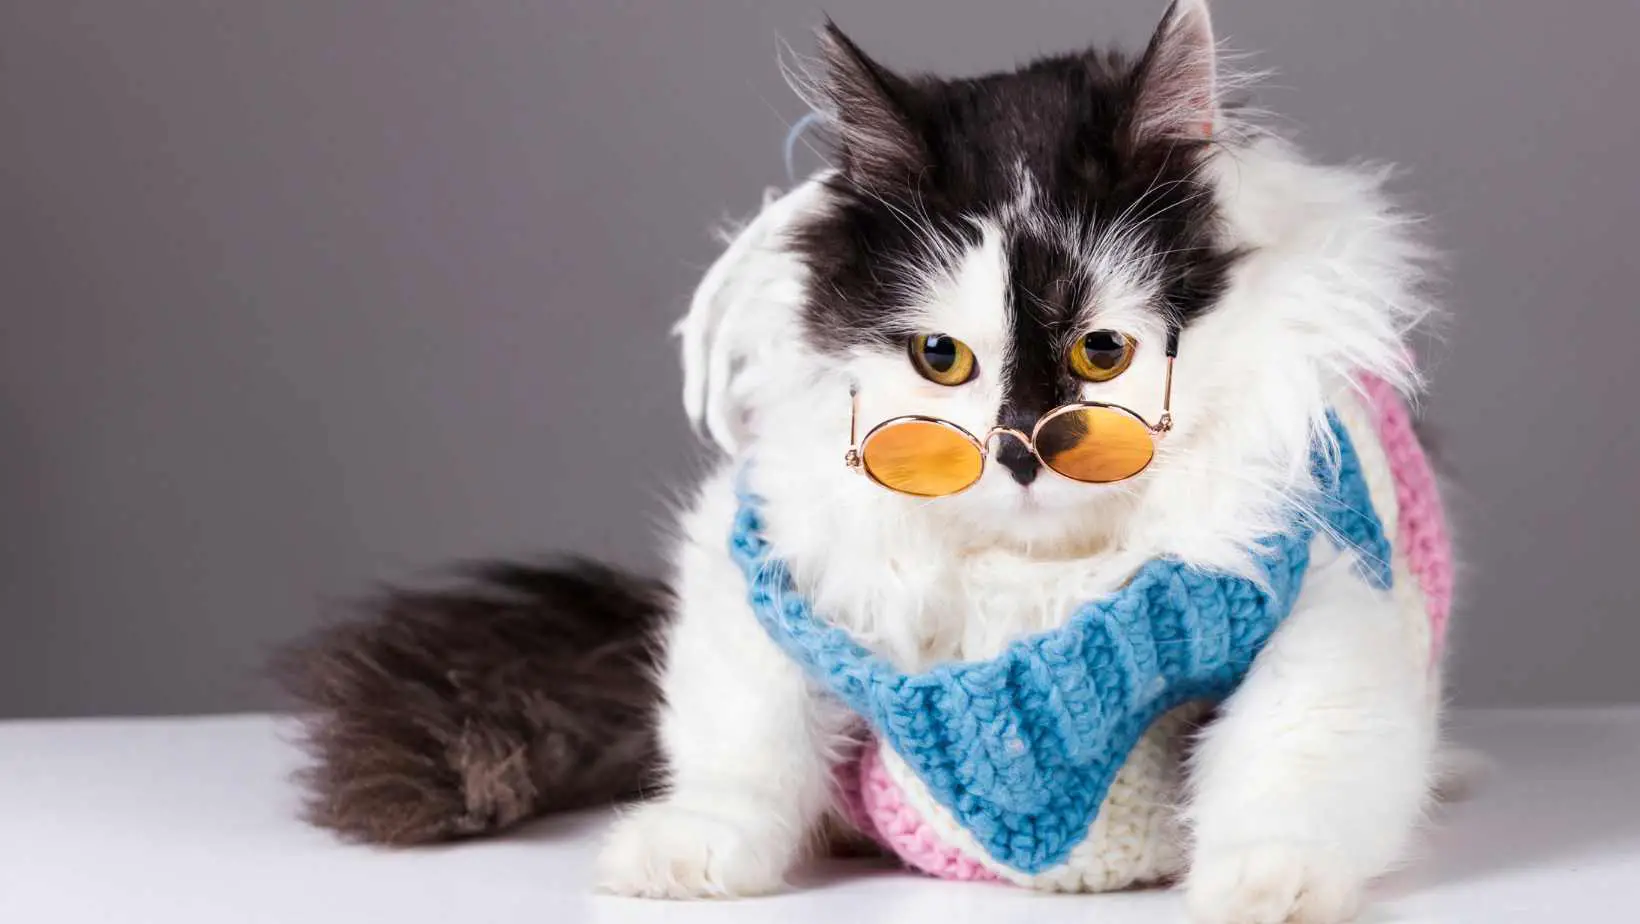 Can Cats Wear Clothes?